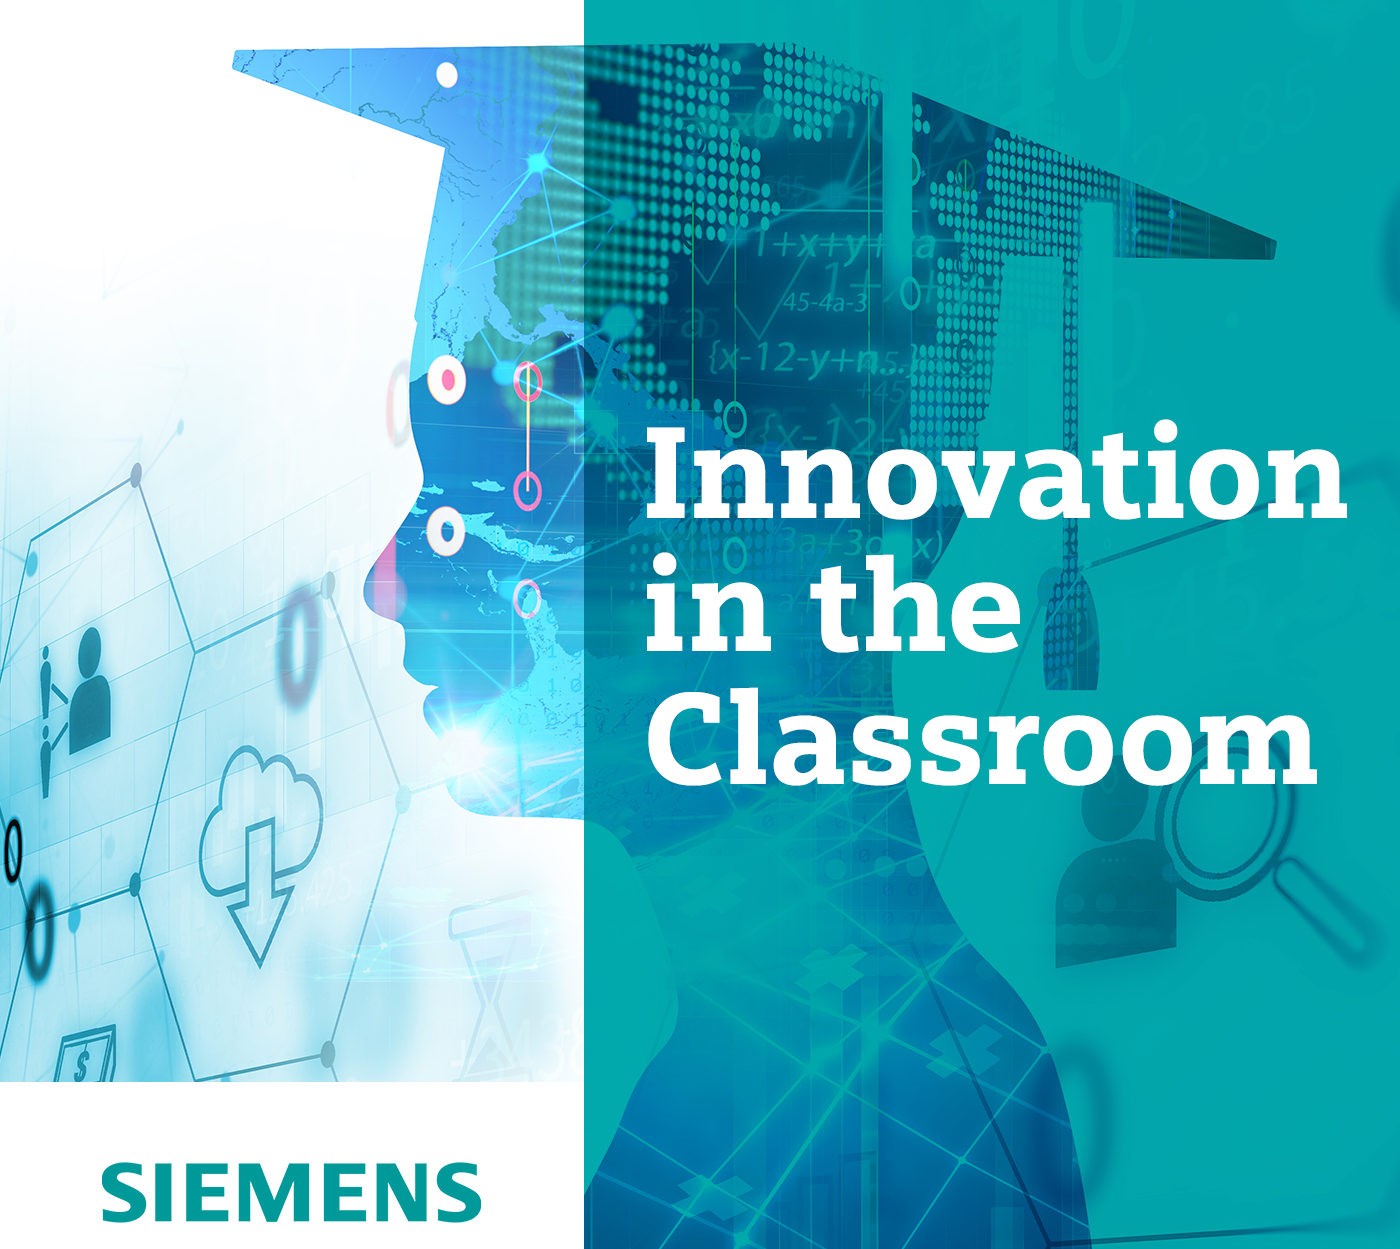 Innovation in the Classroom thumbnail